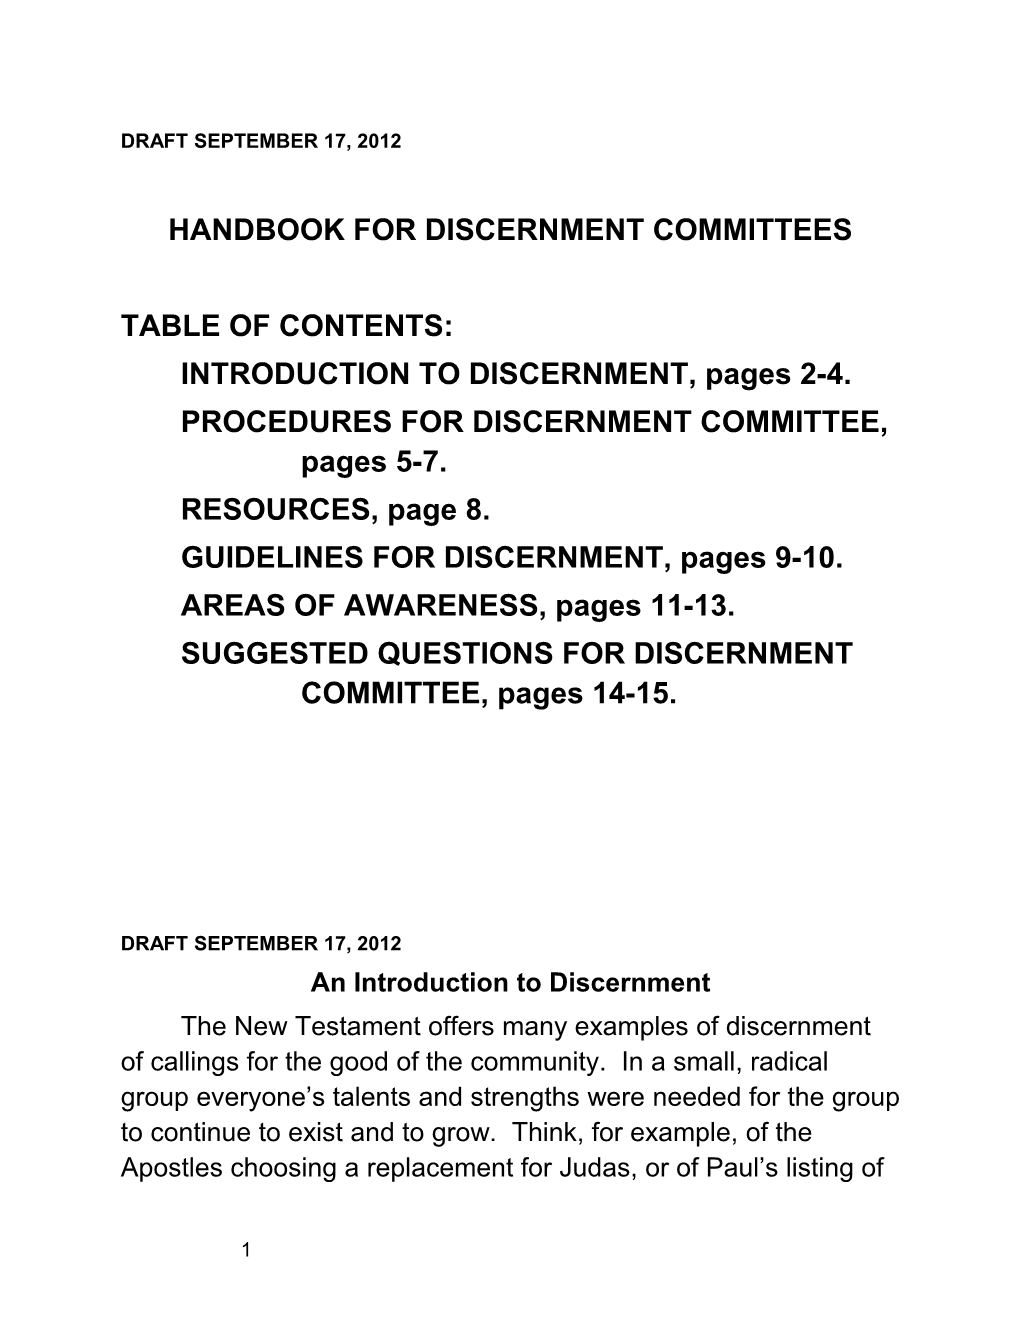 Handbook for Discernment Committees